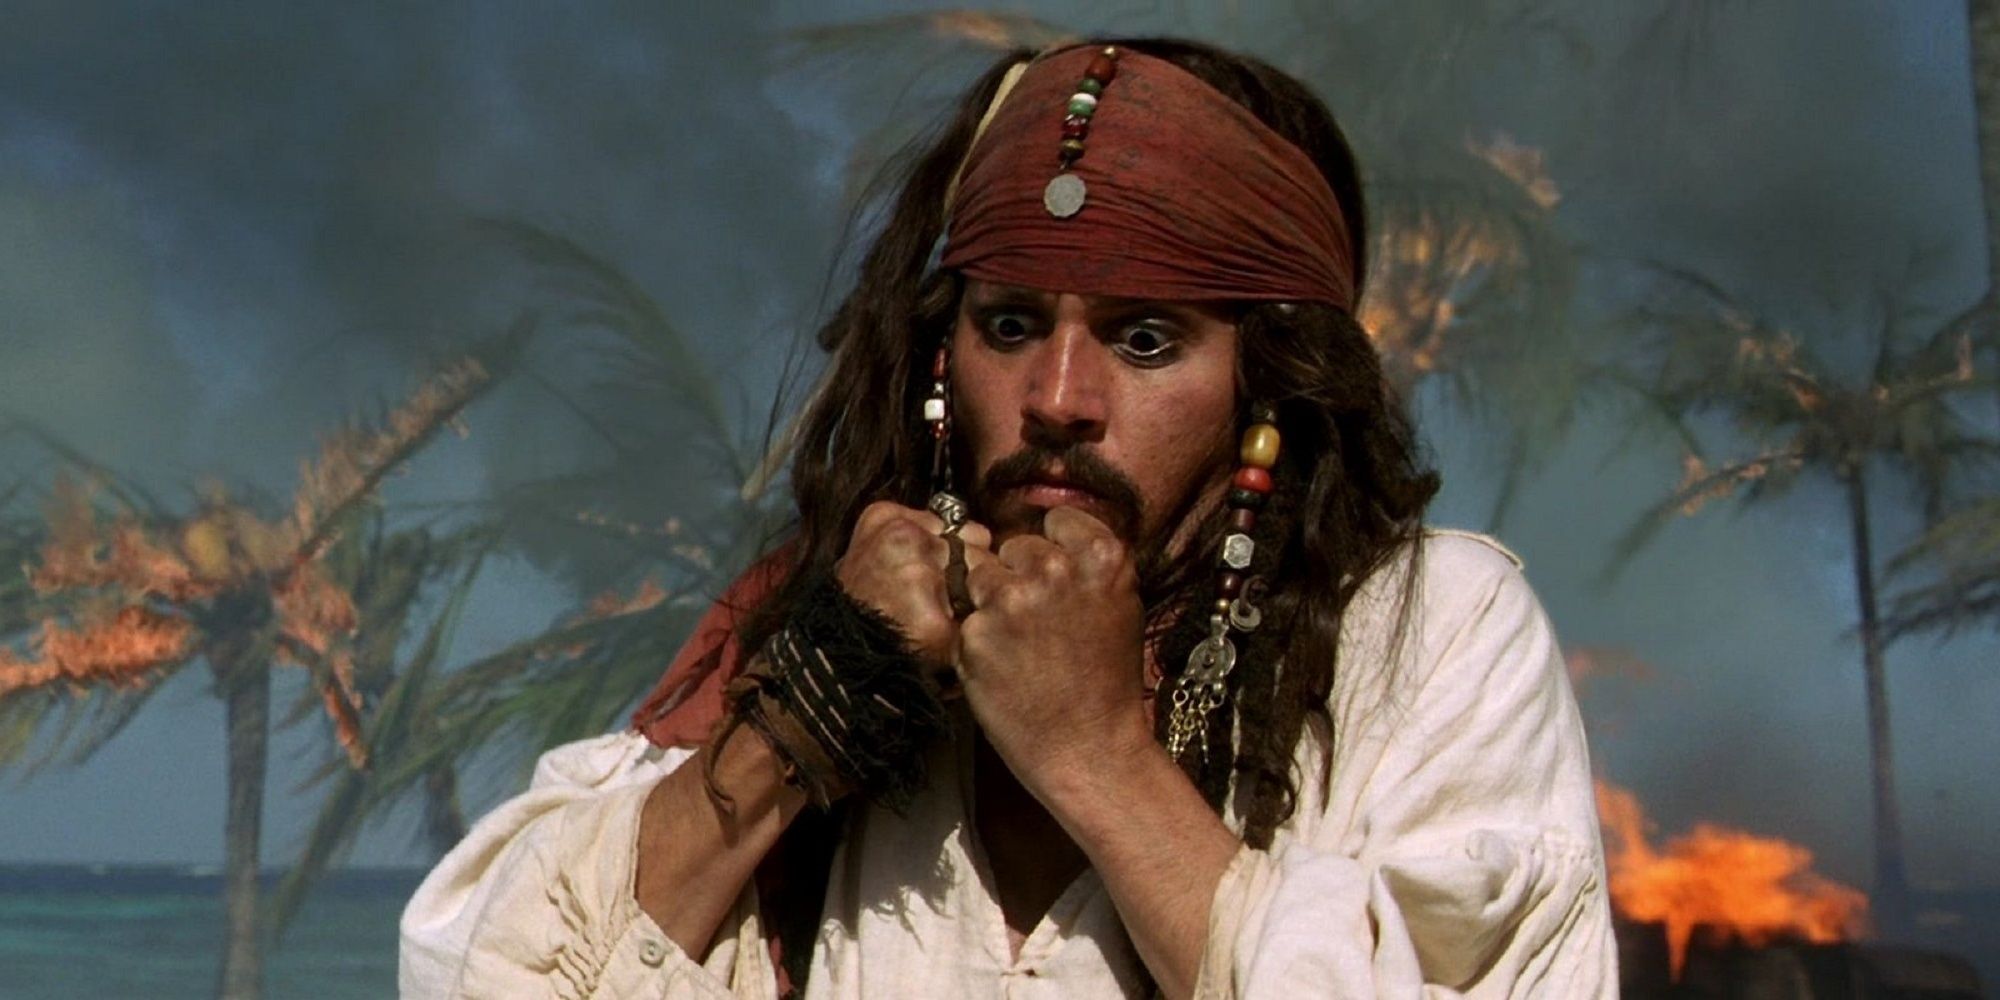 Jack Sparrow realizing the rum is gone in Pirates of the Caribbean: The Curse of the Black Pearl.